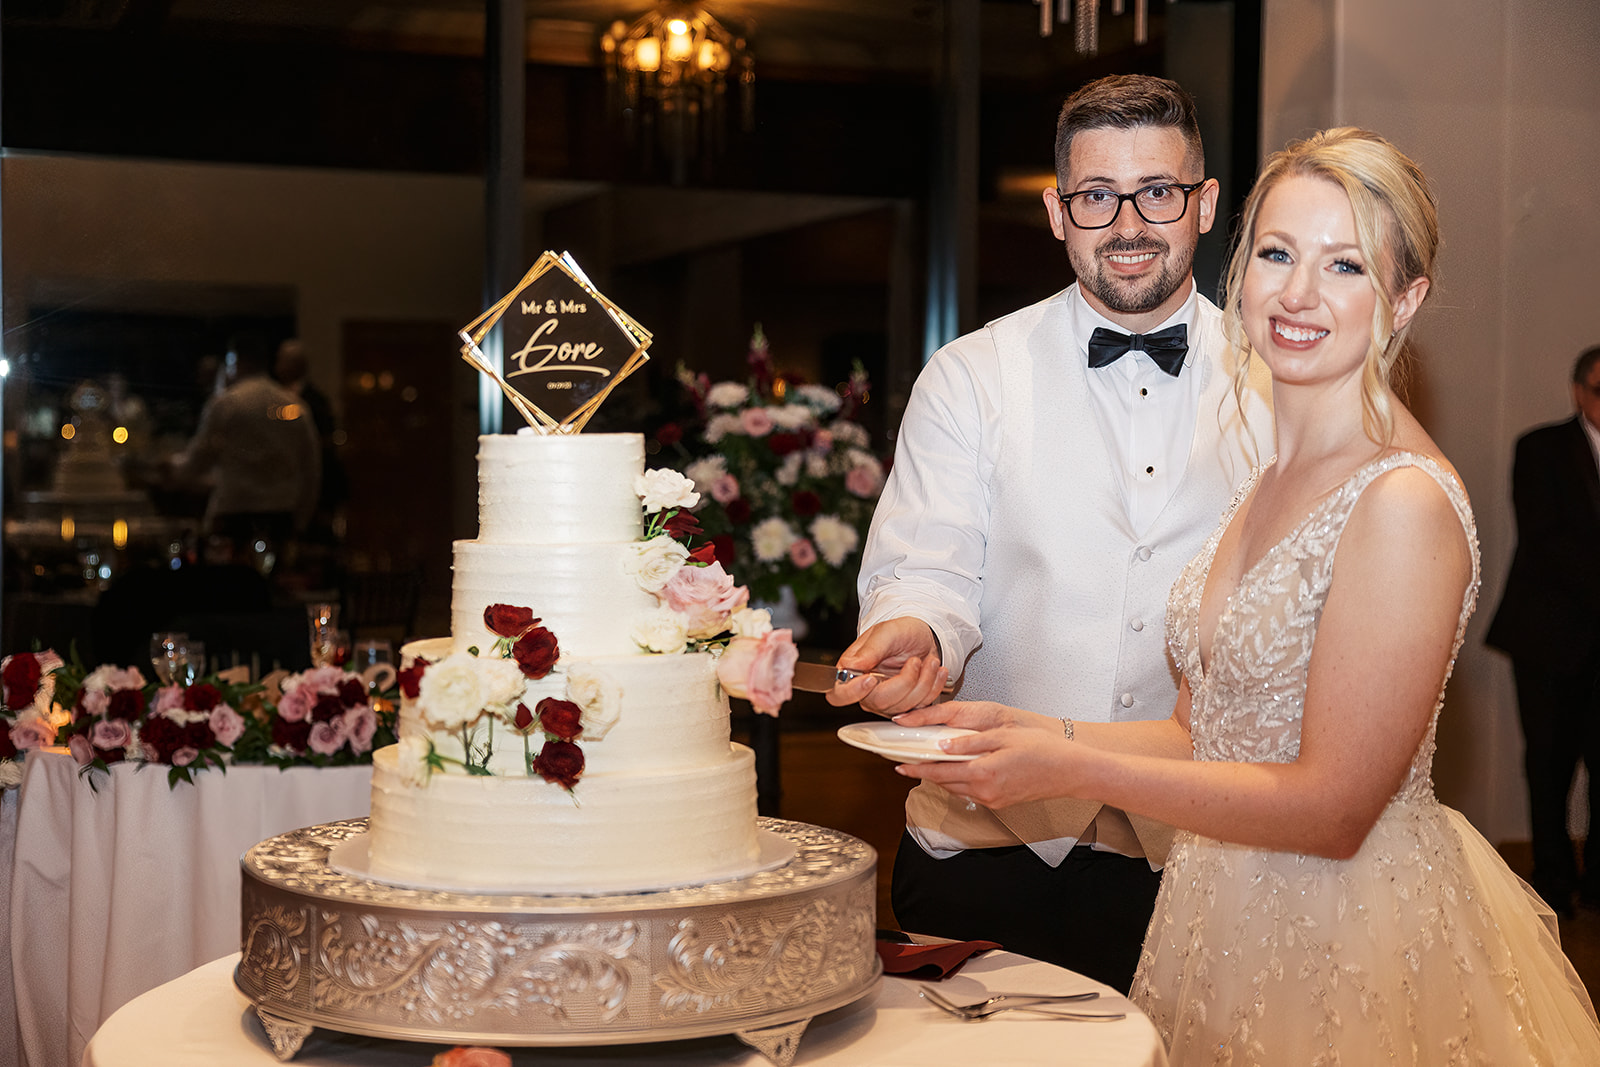 Newlyweds cut the three tier cake together decorated with roses and a custom gold topper